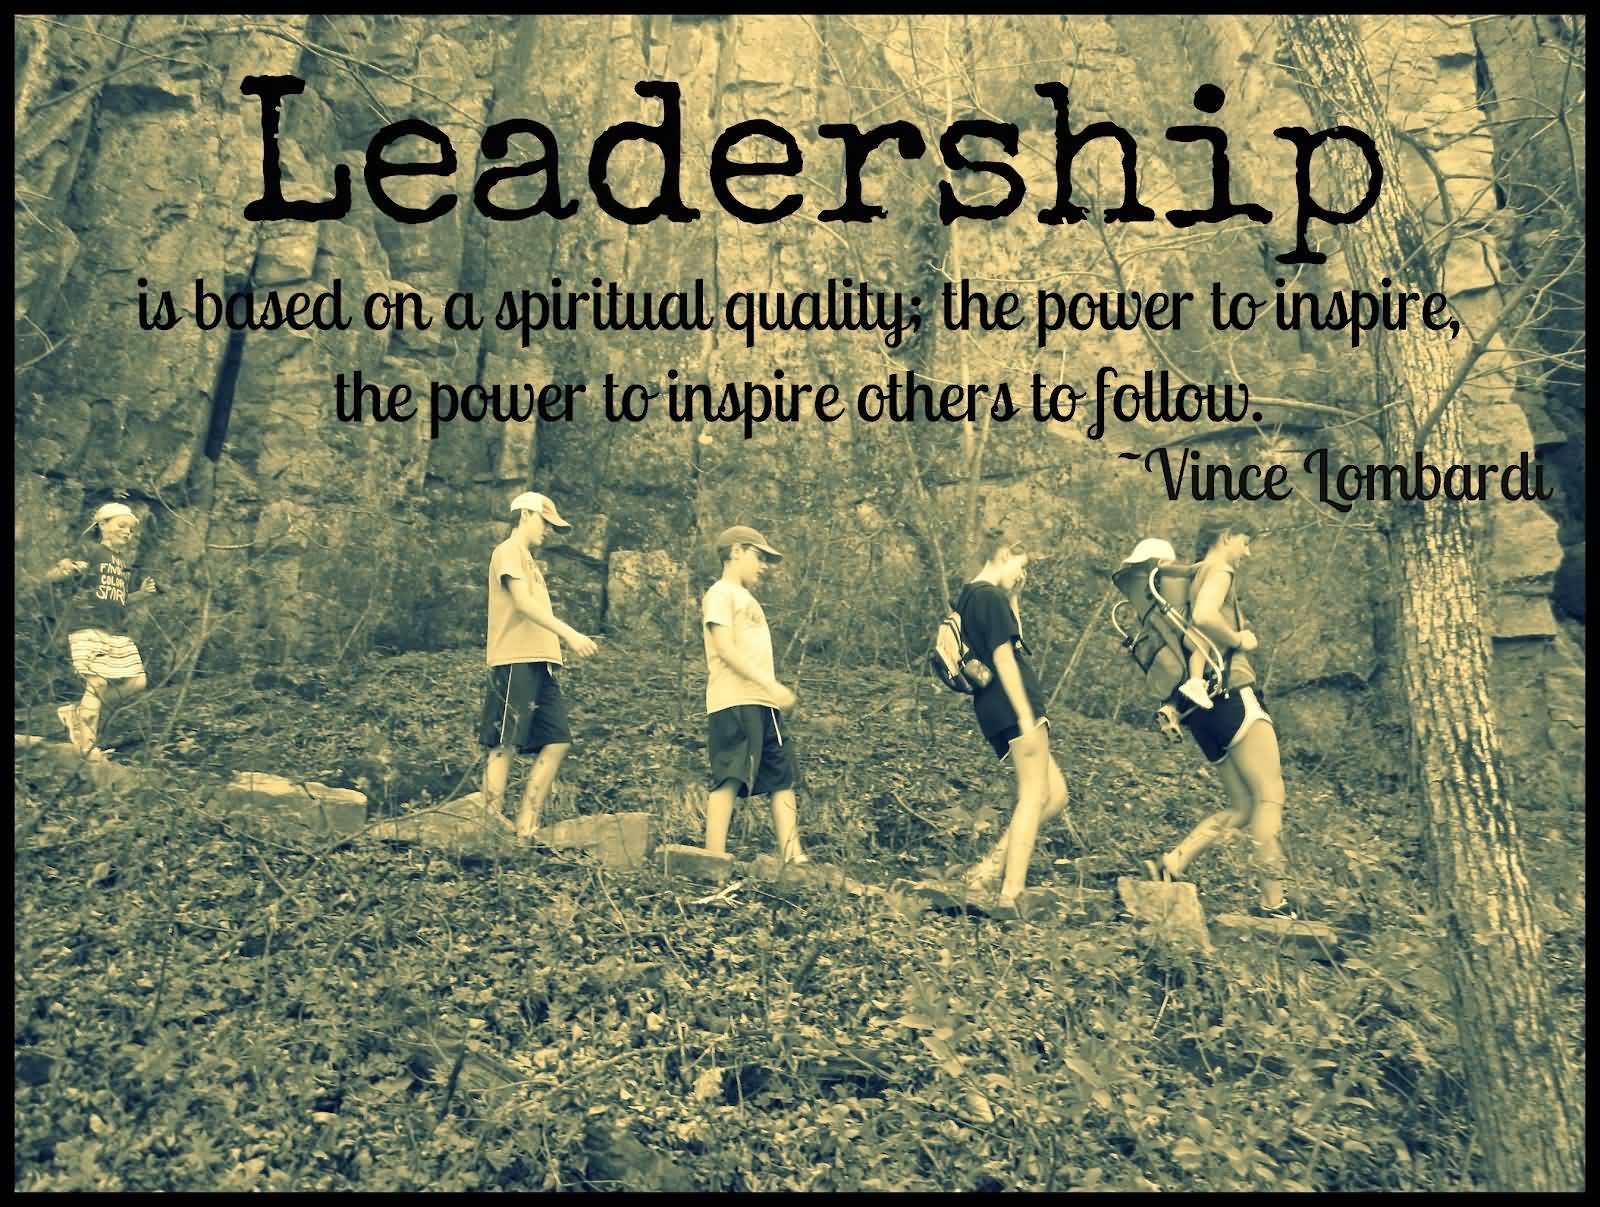 Leadership is based on a spiritual quality; the power to inspire, the power to inspire others to follow. Vince Lombardi